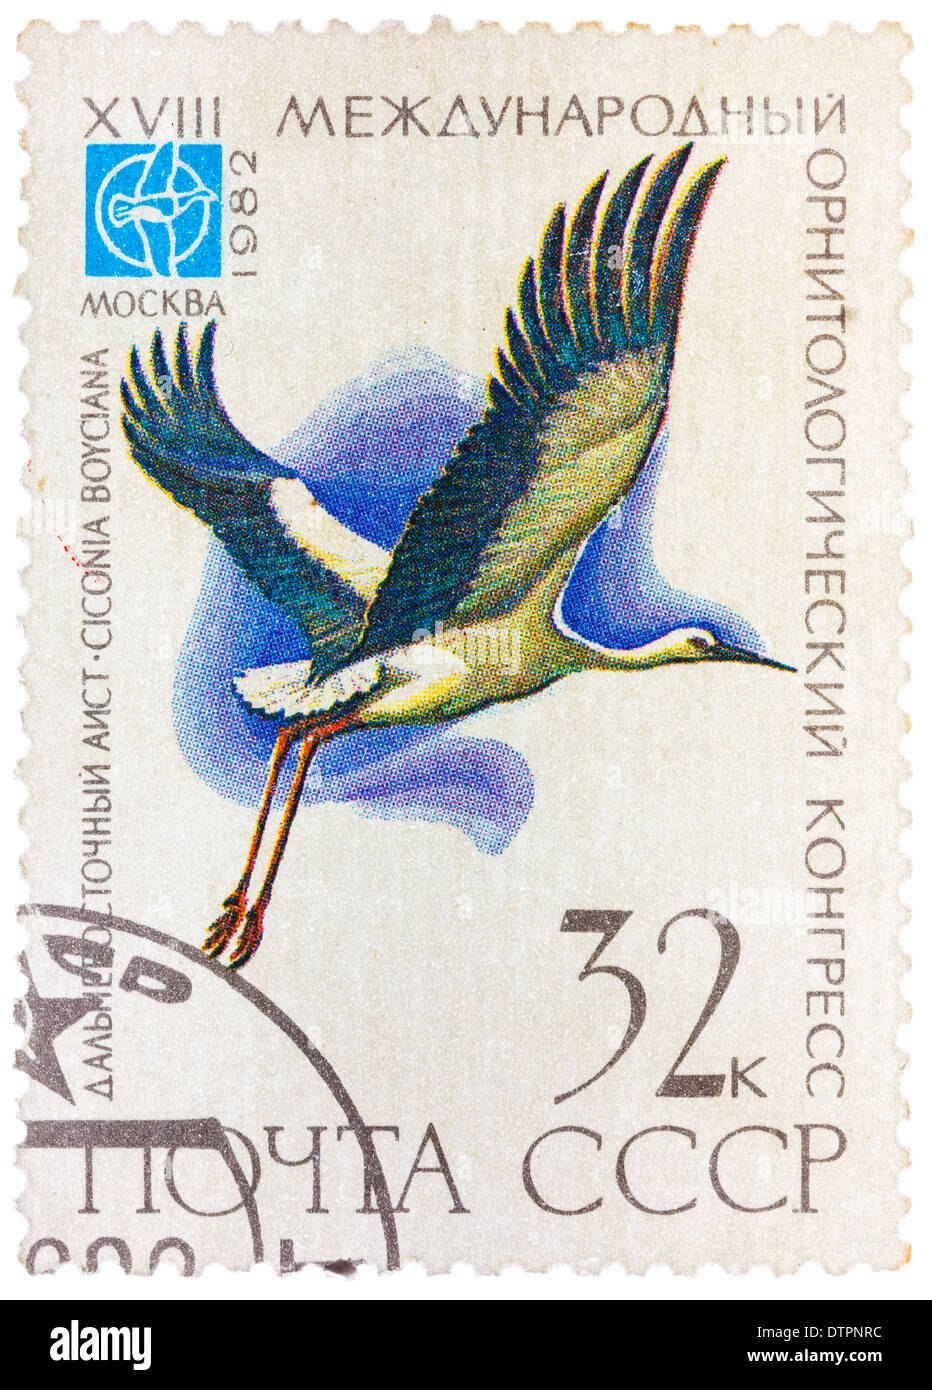 stamp printed in USSR (Russia) shows a bird Ciconia boyciana Stock Photo